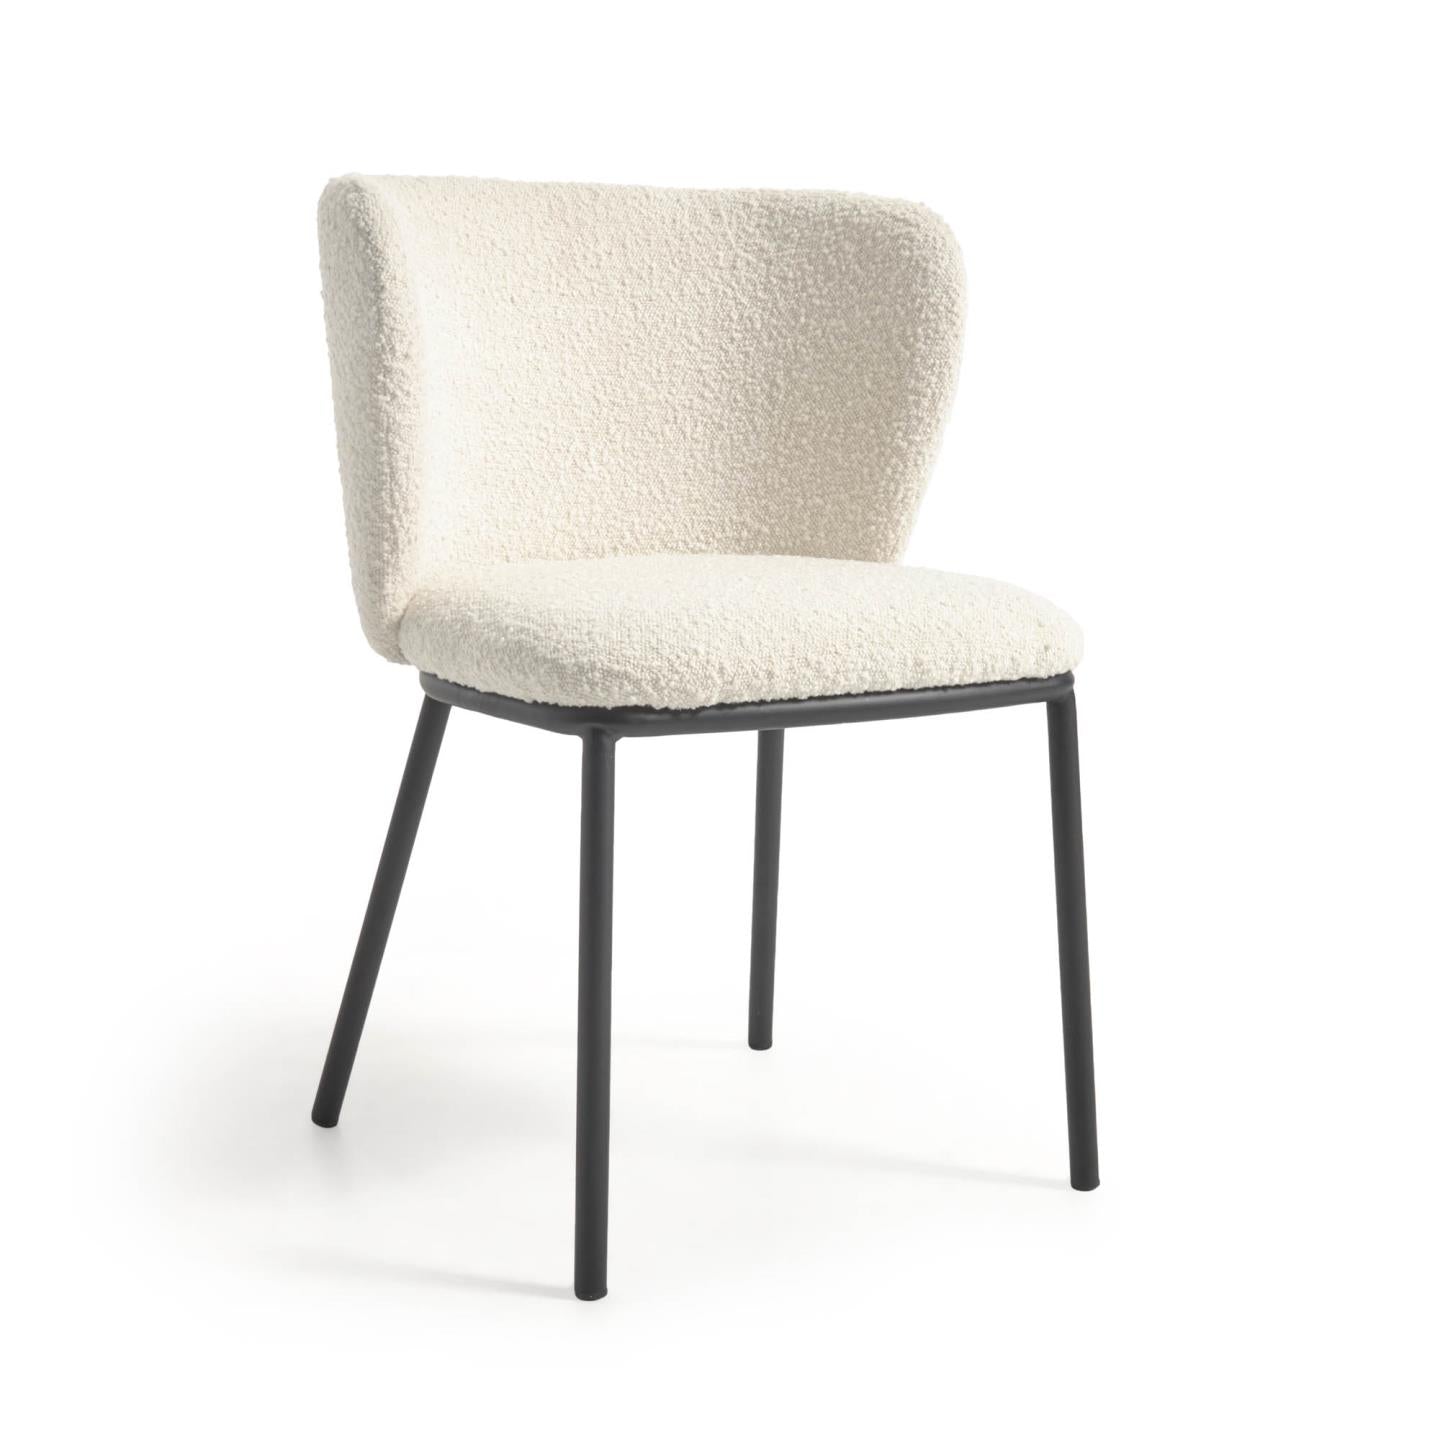 Ciselia chair with white fleece and black metal